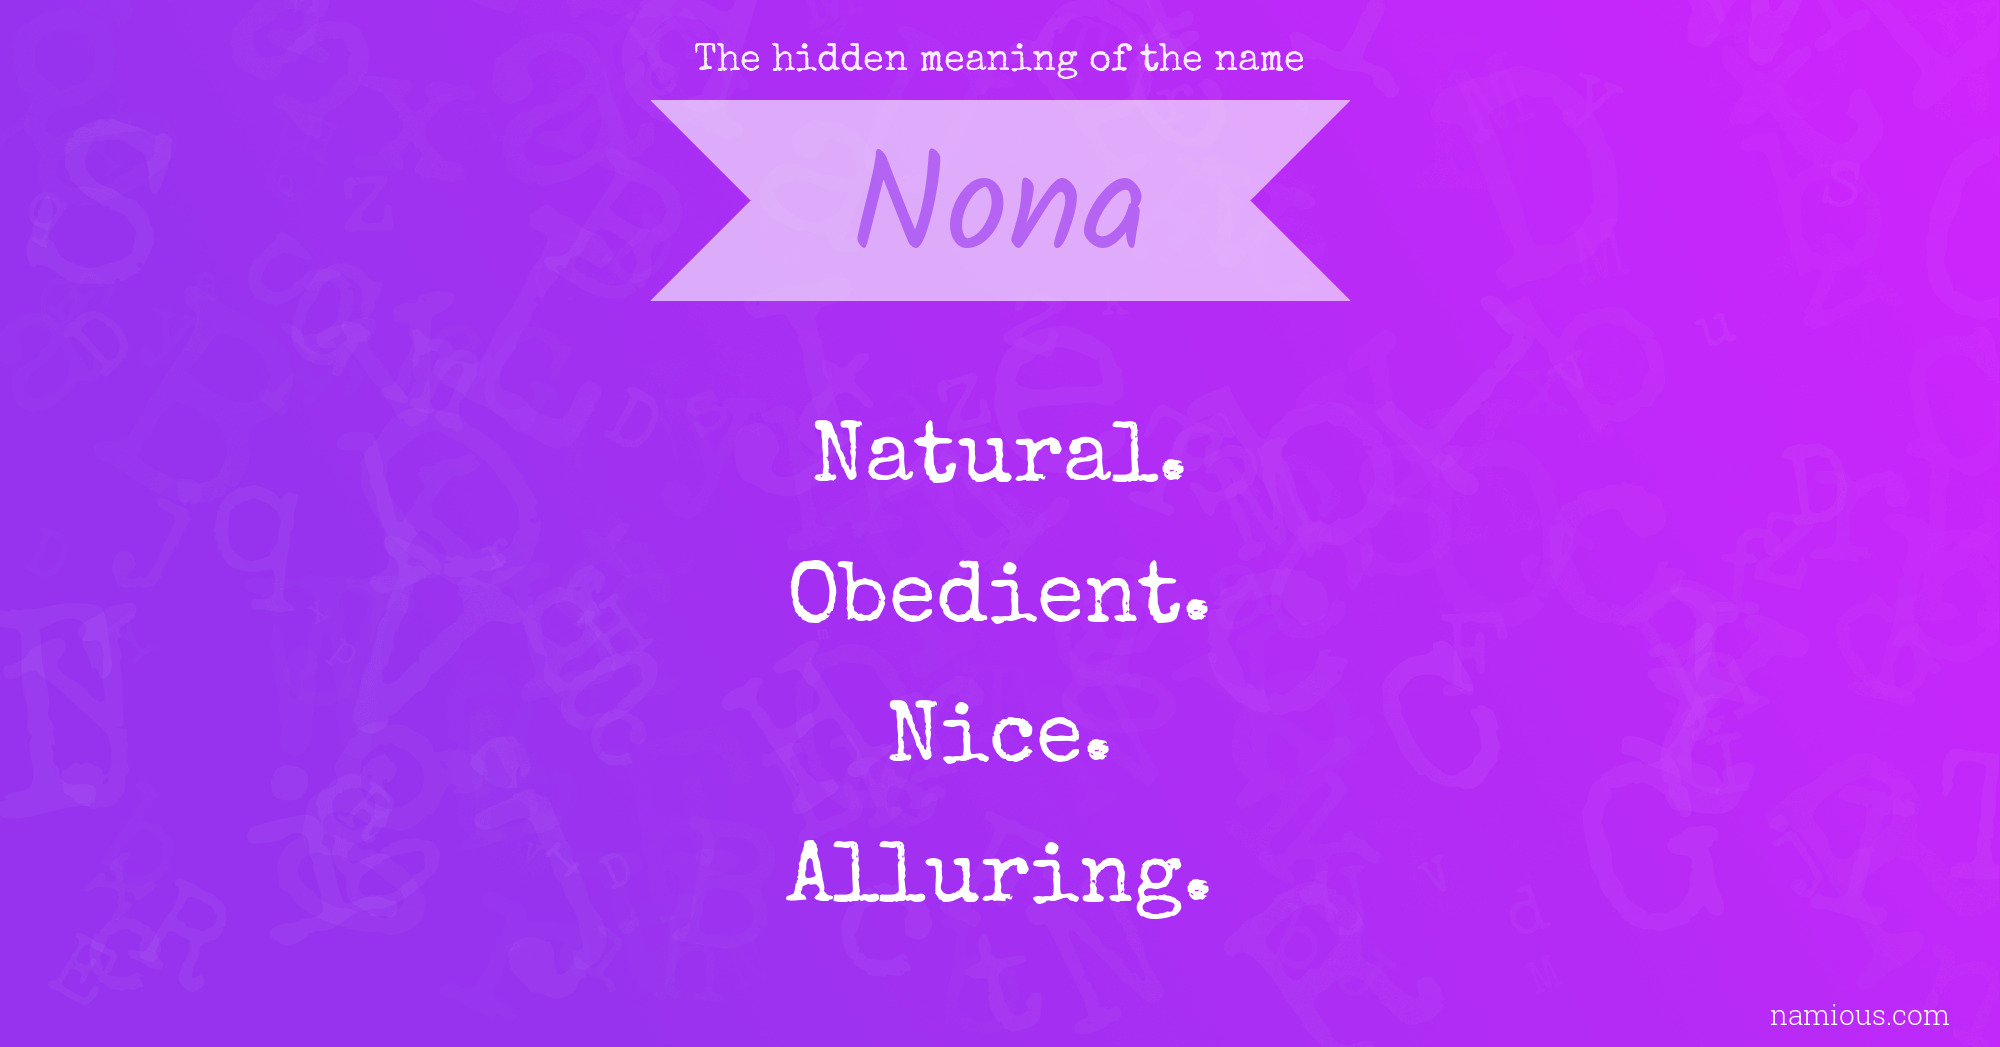 The hidden meaning of the name Nona